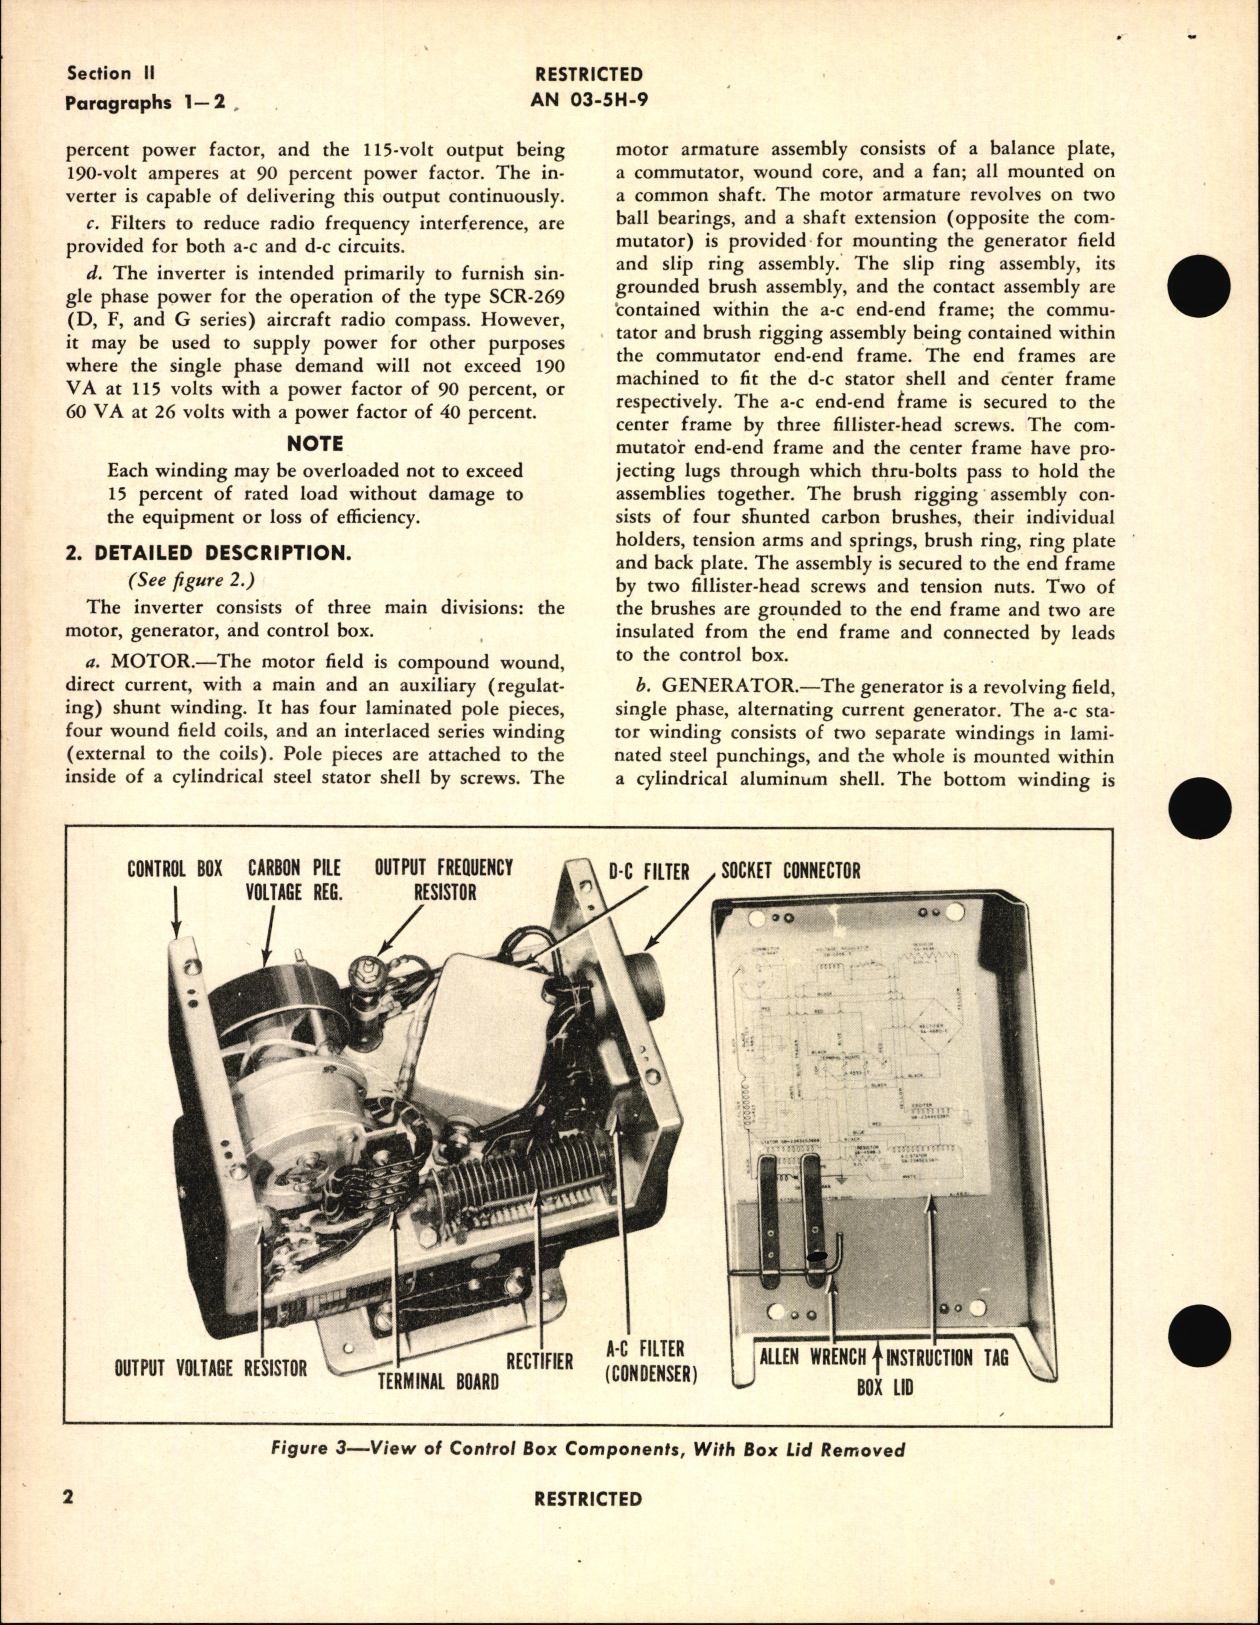 Sample page 6 from AirCorps Library document: Handbook of Instructions with Parts Catalog for 250 VA Rotary Inverter